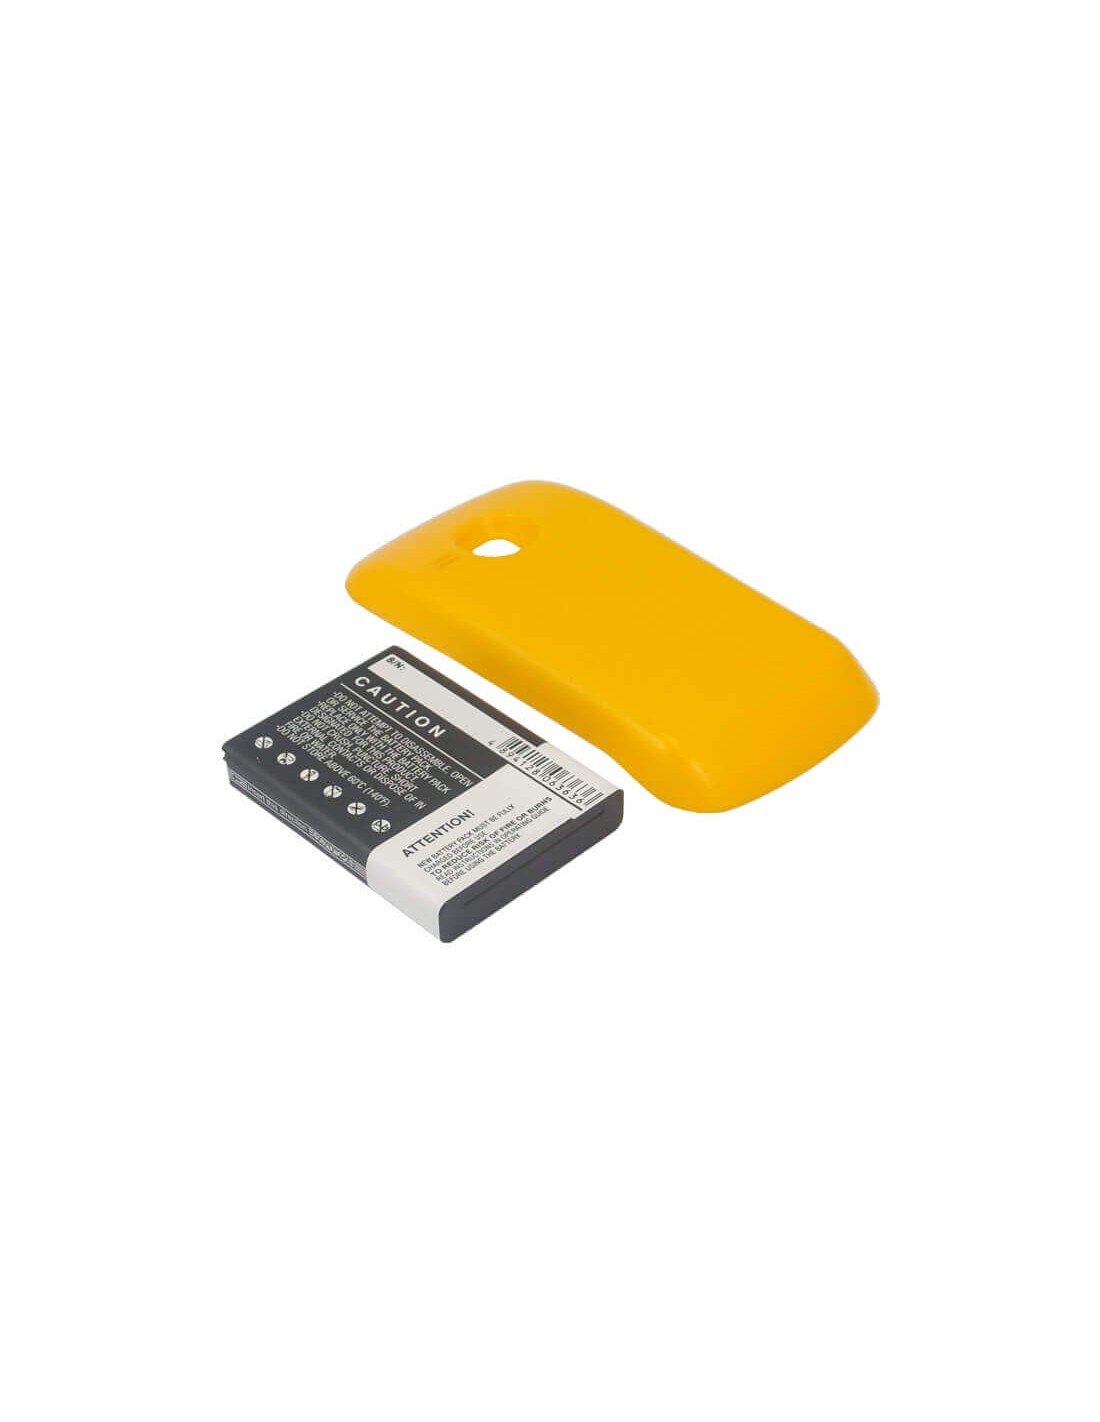 Battery for Samsung GT-S6500, GT-S6500D, Galaxy Mini 2, yellow cover 3.7V, 2400mAh - 8.88Wh